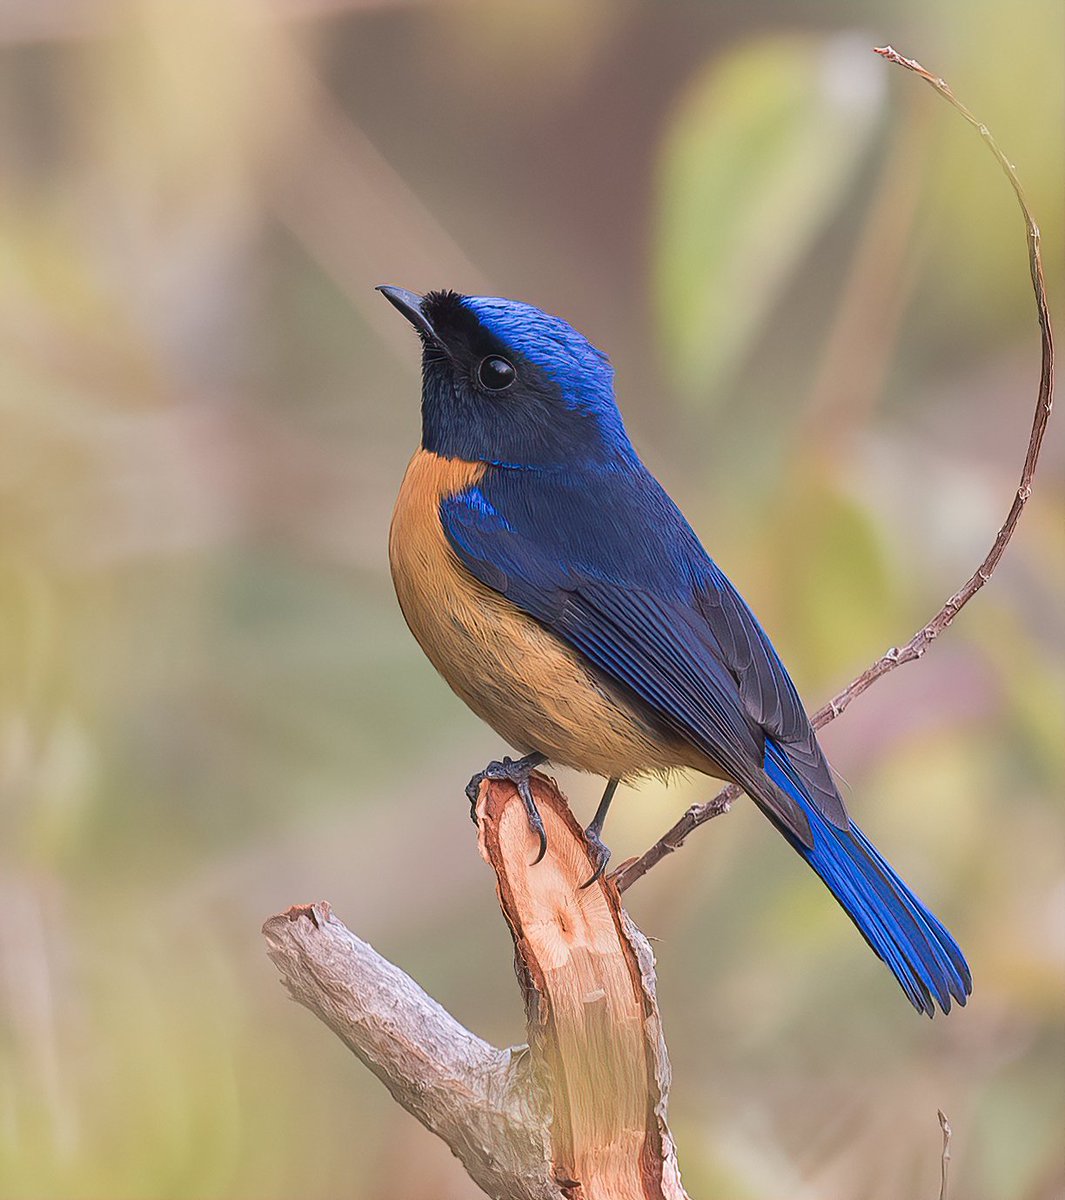 #MondayBlues How about sharing anything blue from the gallery? Rufous-bellied Niltava #IndiAves #ThePhotoHour